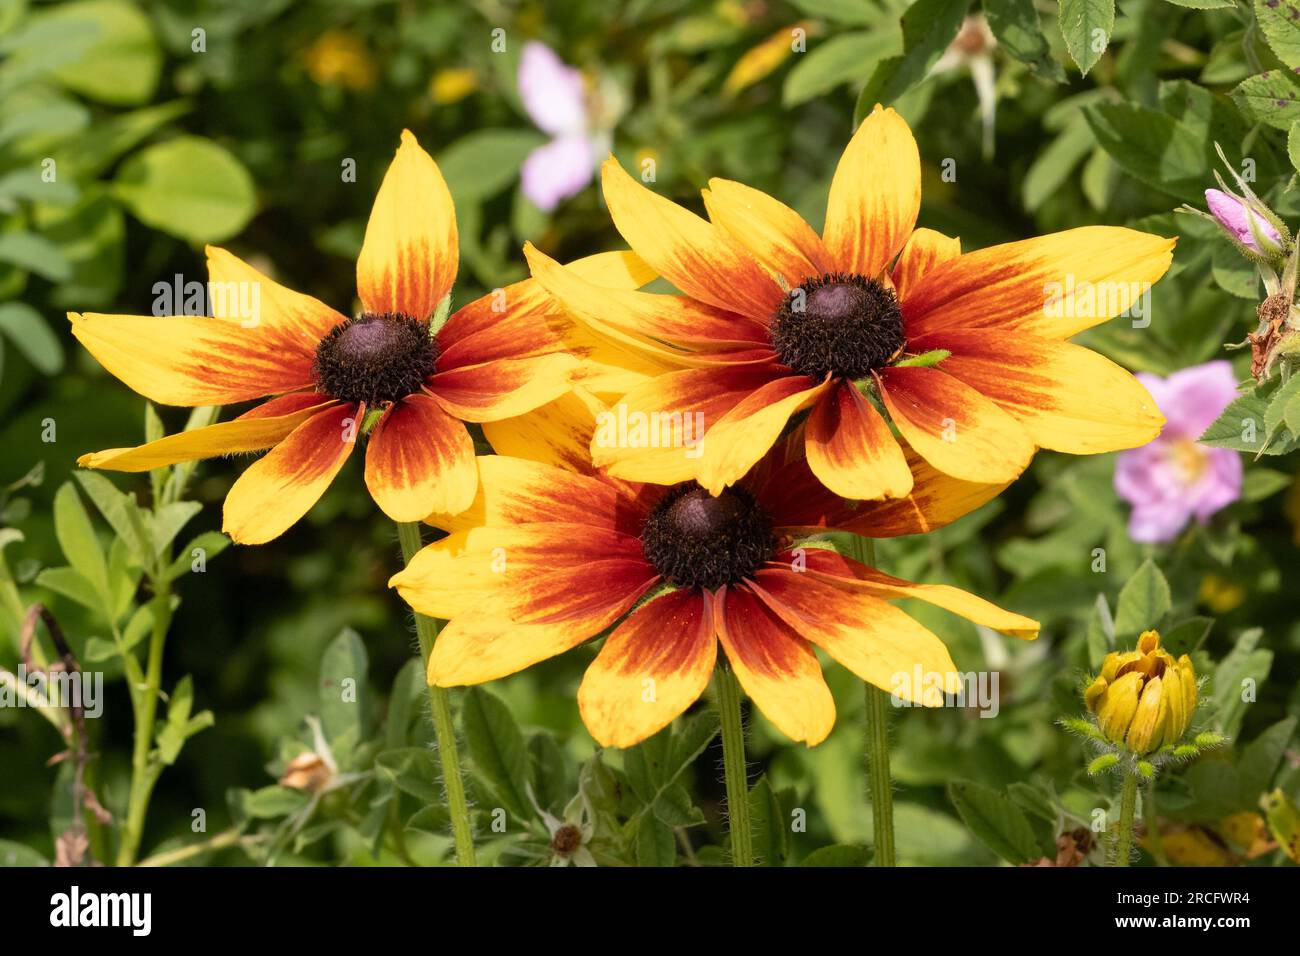 Three isolated tops of black-eyed susan coneflowers, with bright yellow and orange blooms, surrounded by a slightly blurred background of green leaves Stock Photo